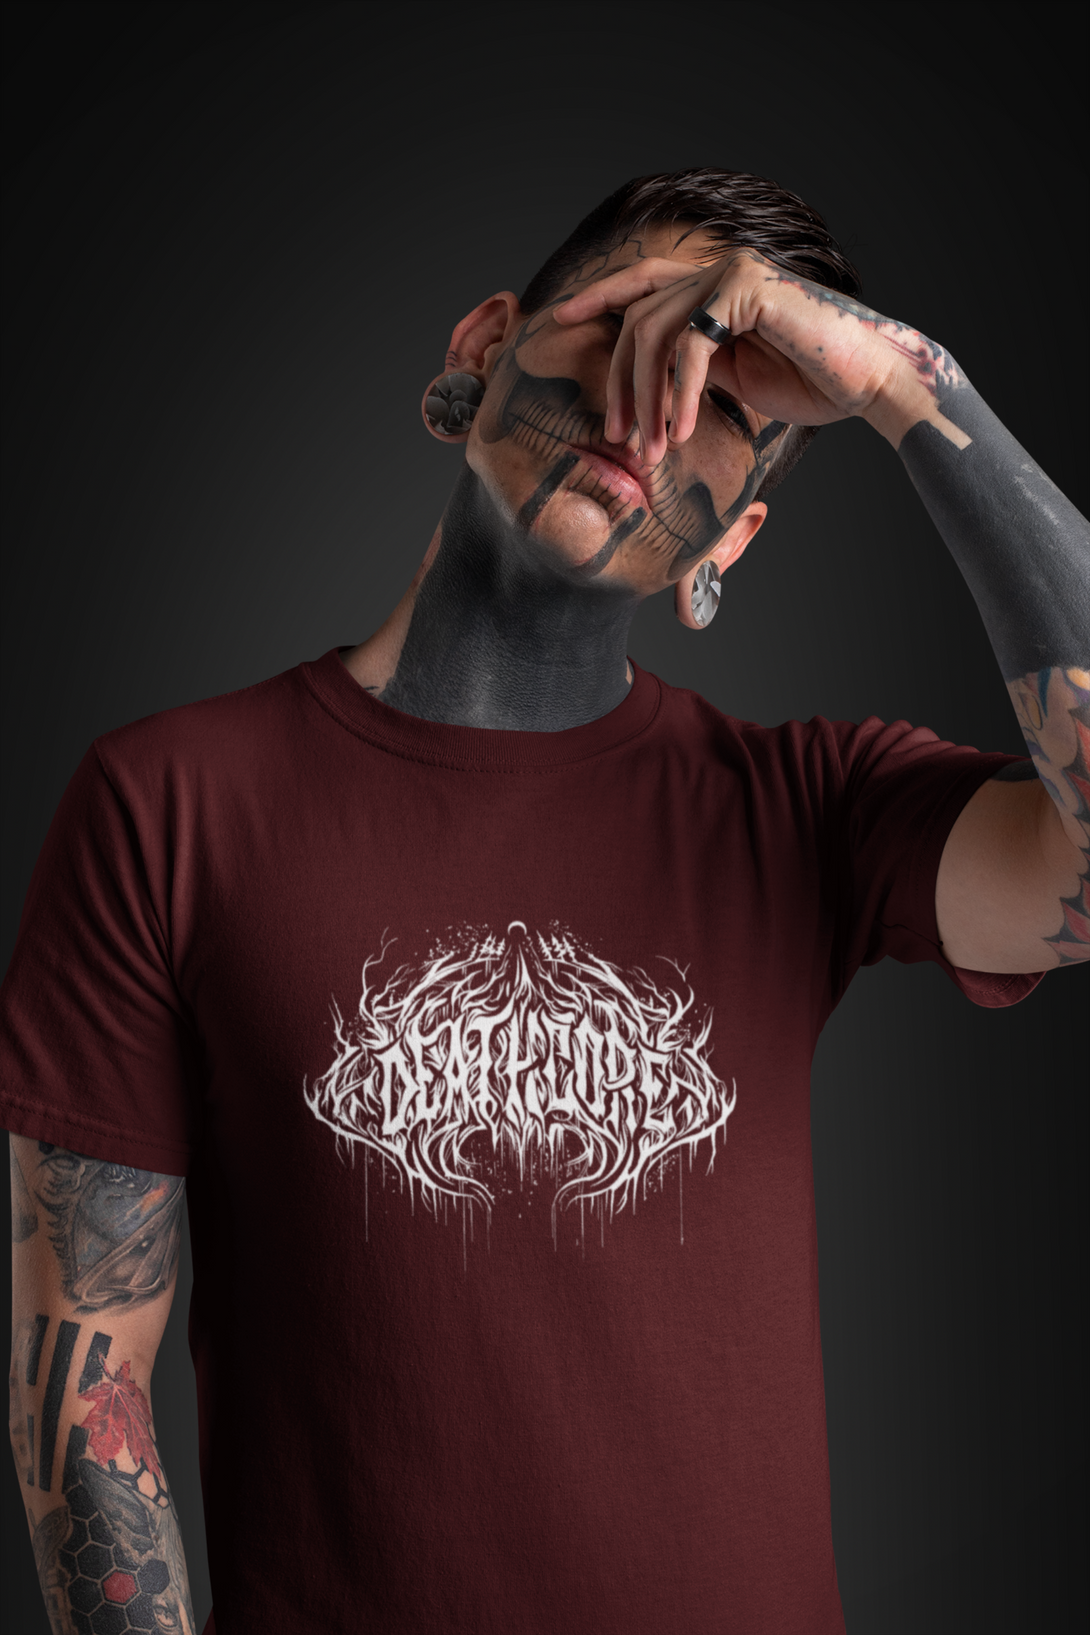 Gothic Deathcore Printed T-Shirt For Men - WowWaves - 2